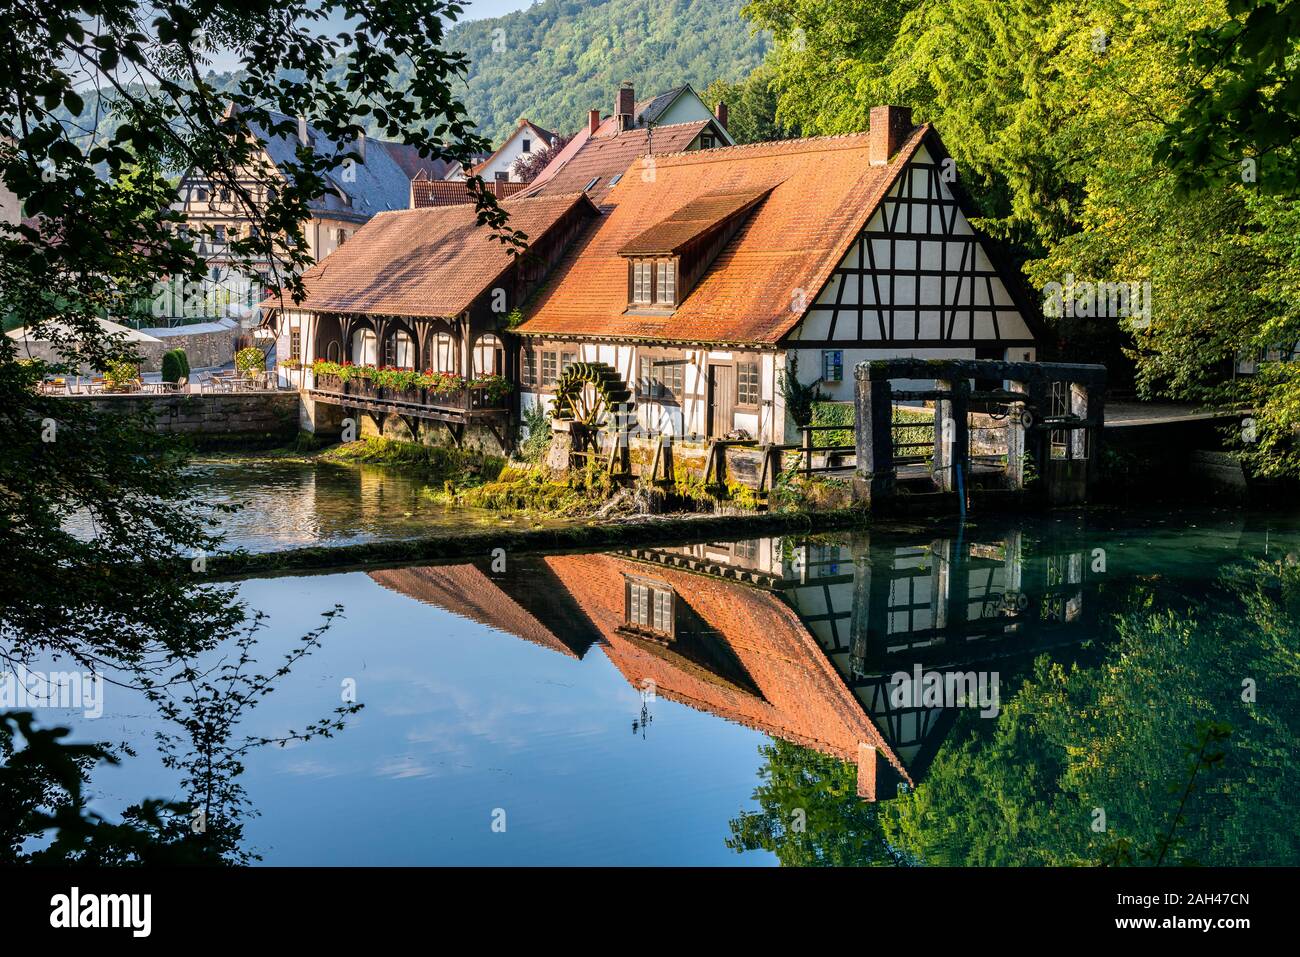 Germany, Baden-Wurttemberg, Blaubeuren, Countryside cottages reflecting in shiny river Stock Photo